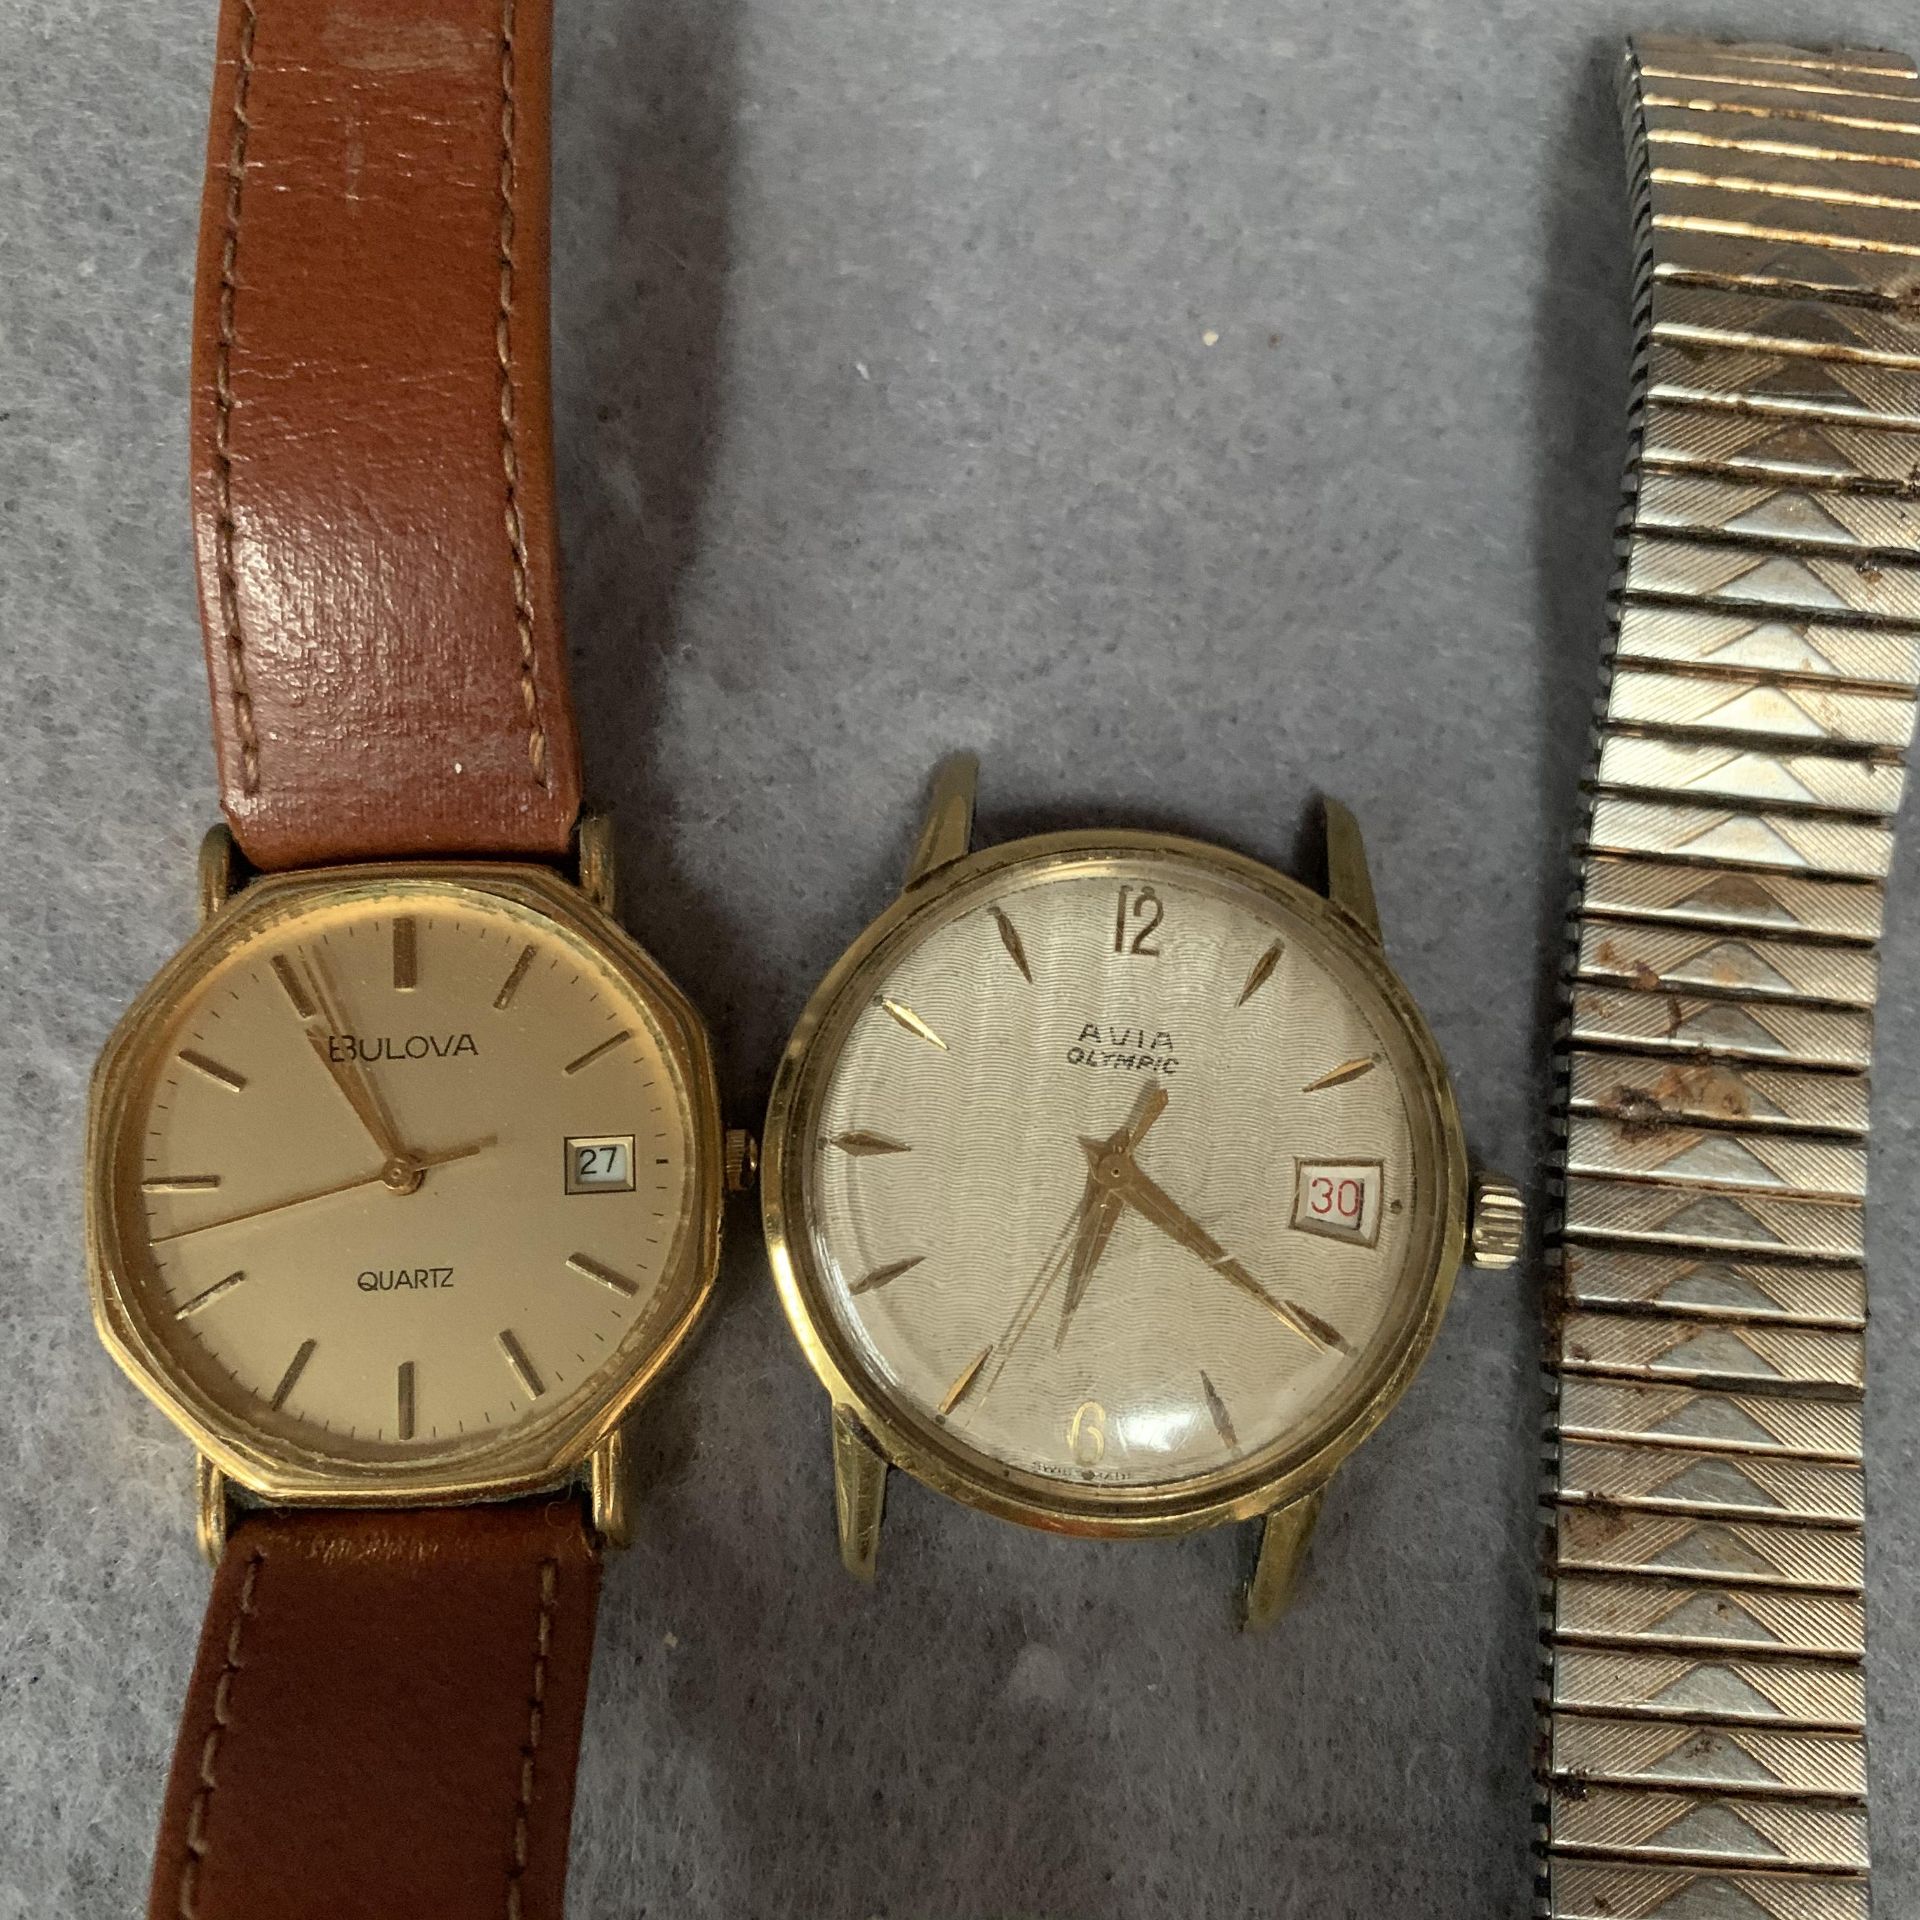 A Bulova quartz gentleman's wristwatch with brown leather strap and an Avia Olympic watch face (2)